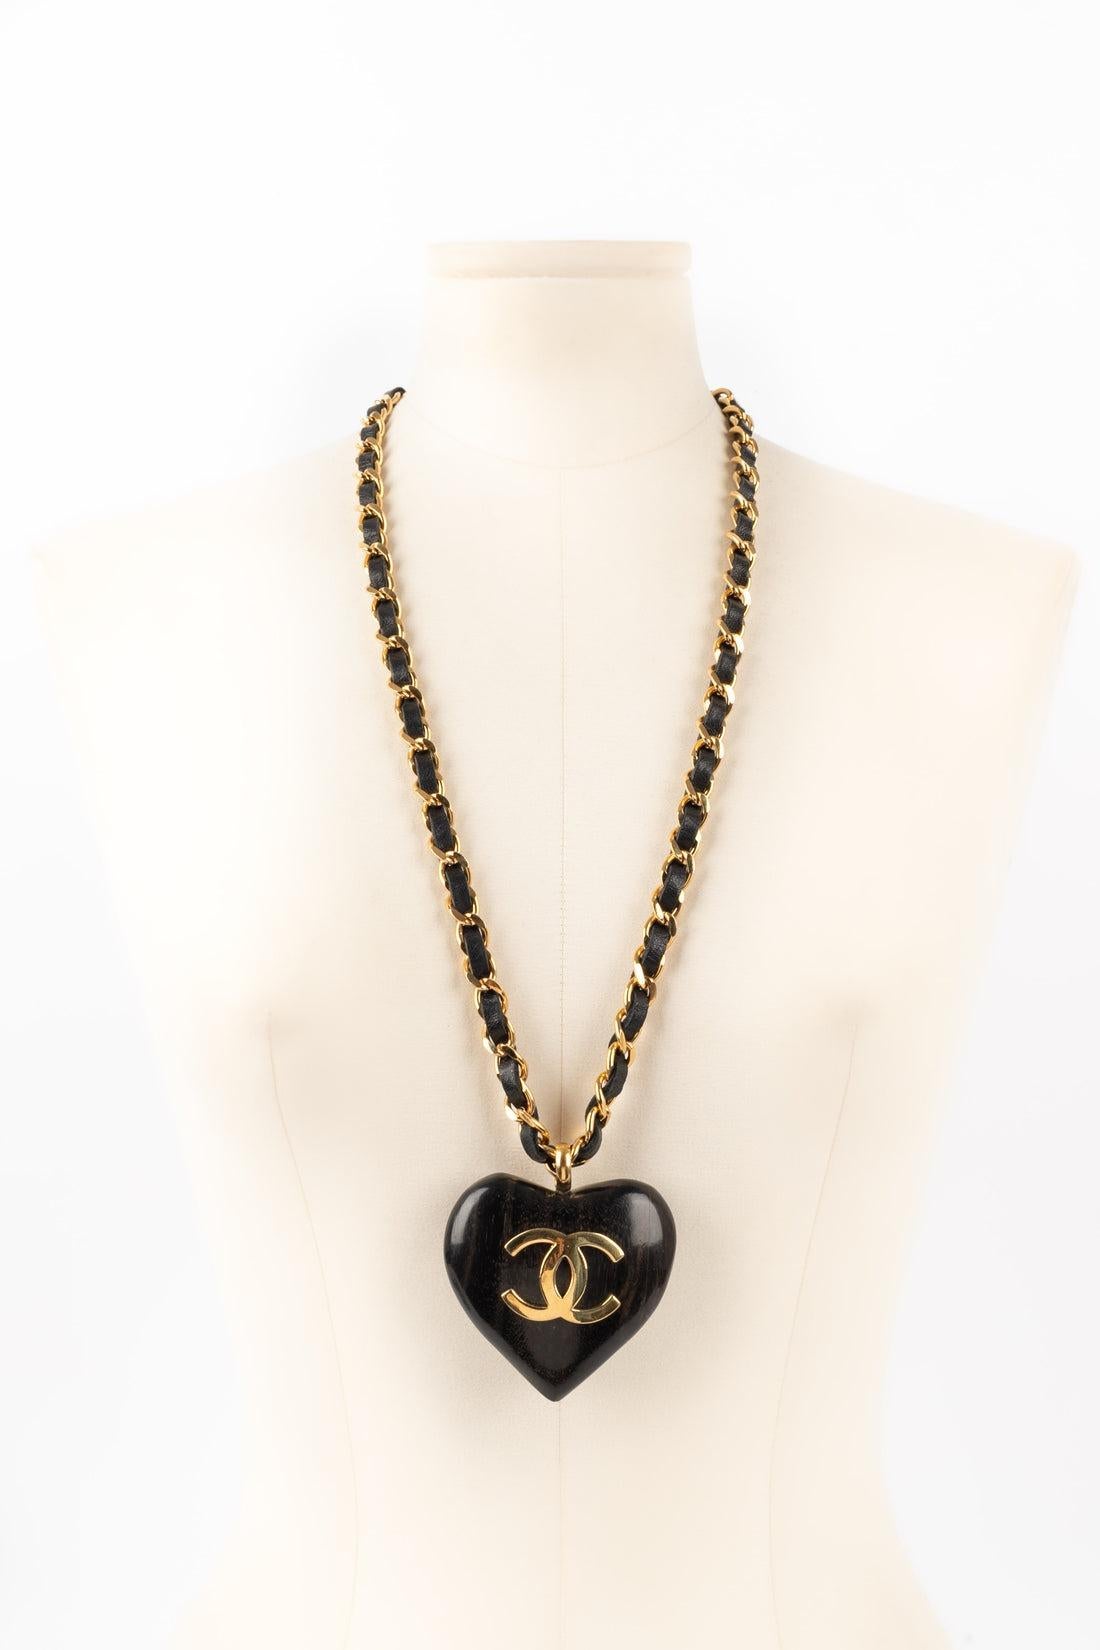 Chanel - (Made in France) Golden metal necklace with black leather and a wood heart topped with a cc logo. Spring-Summer 1992 Collection.

Additional information:
Condition: Very good condition
Dimensions: Length: 76 cm
Period: 20th Century

Seller